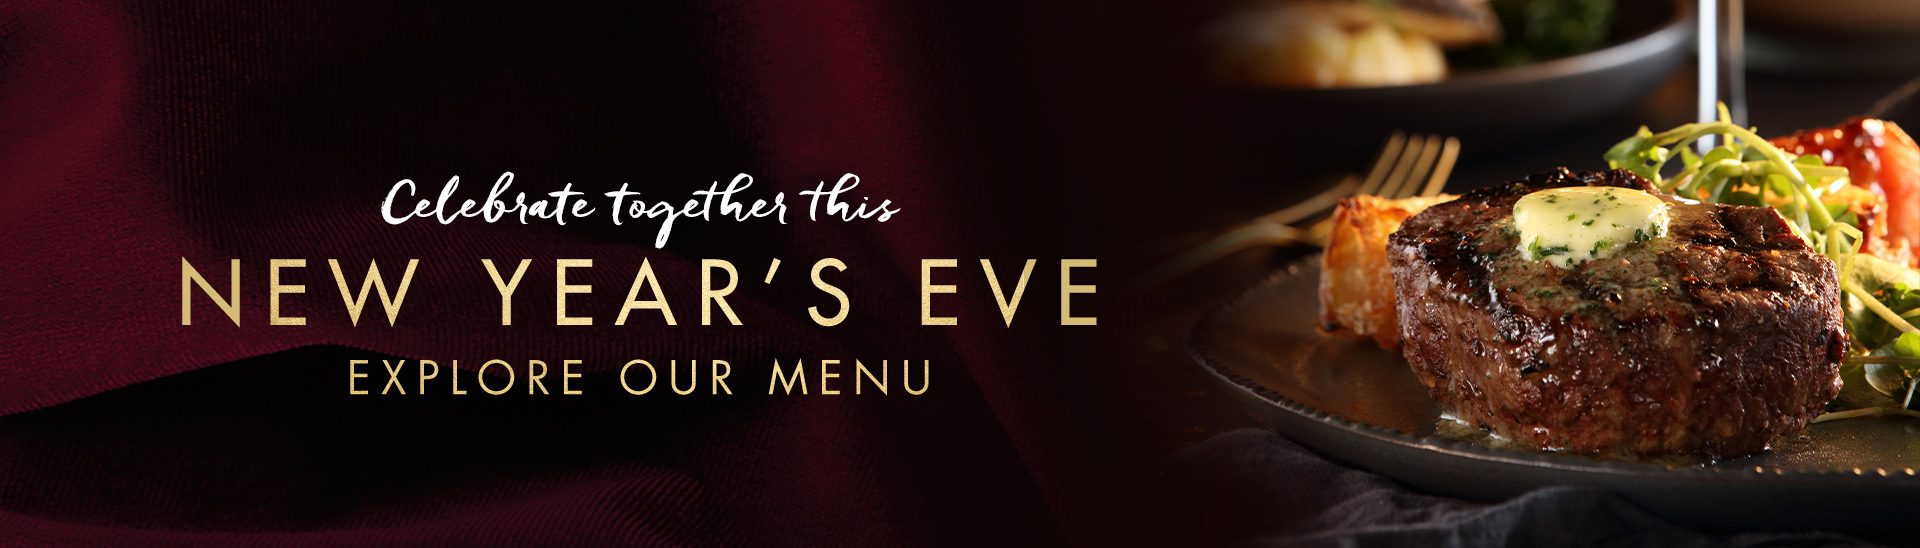 New Year’s eve menu at Miller & Carter Wheathampstead 